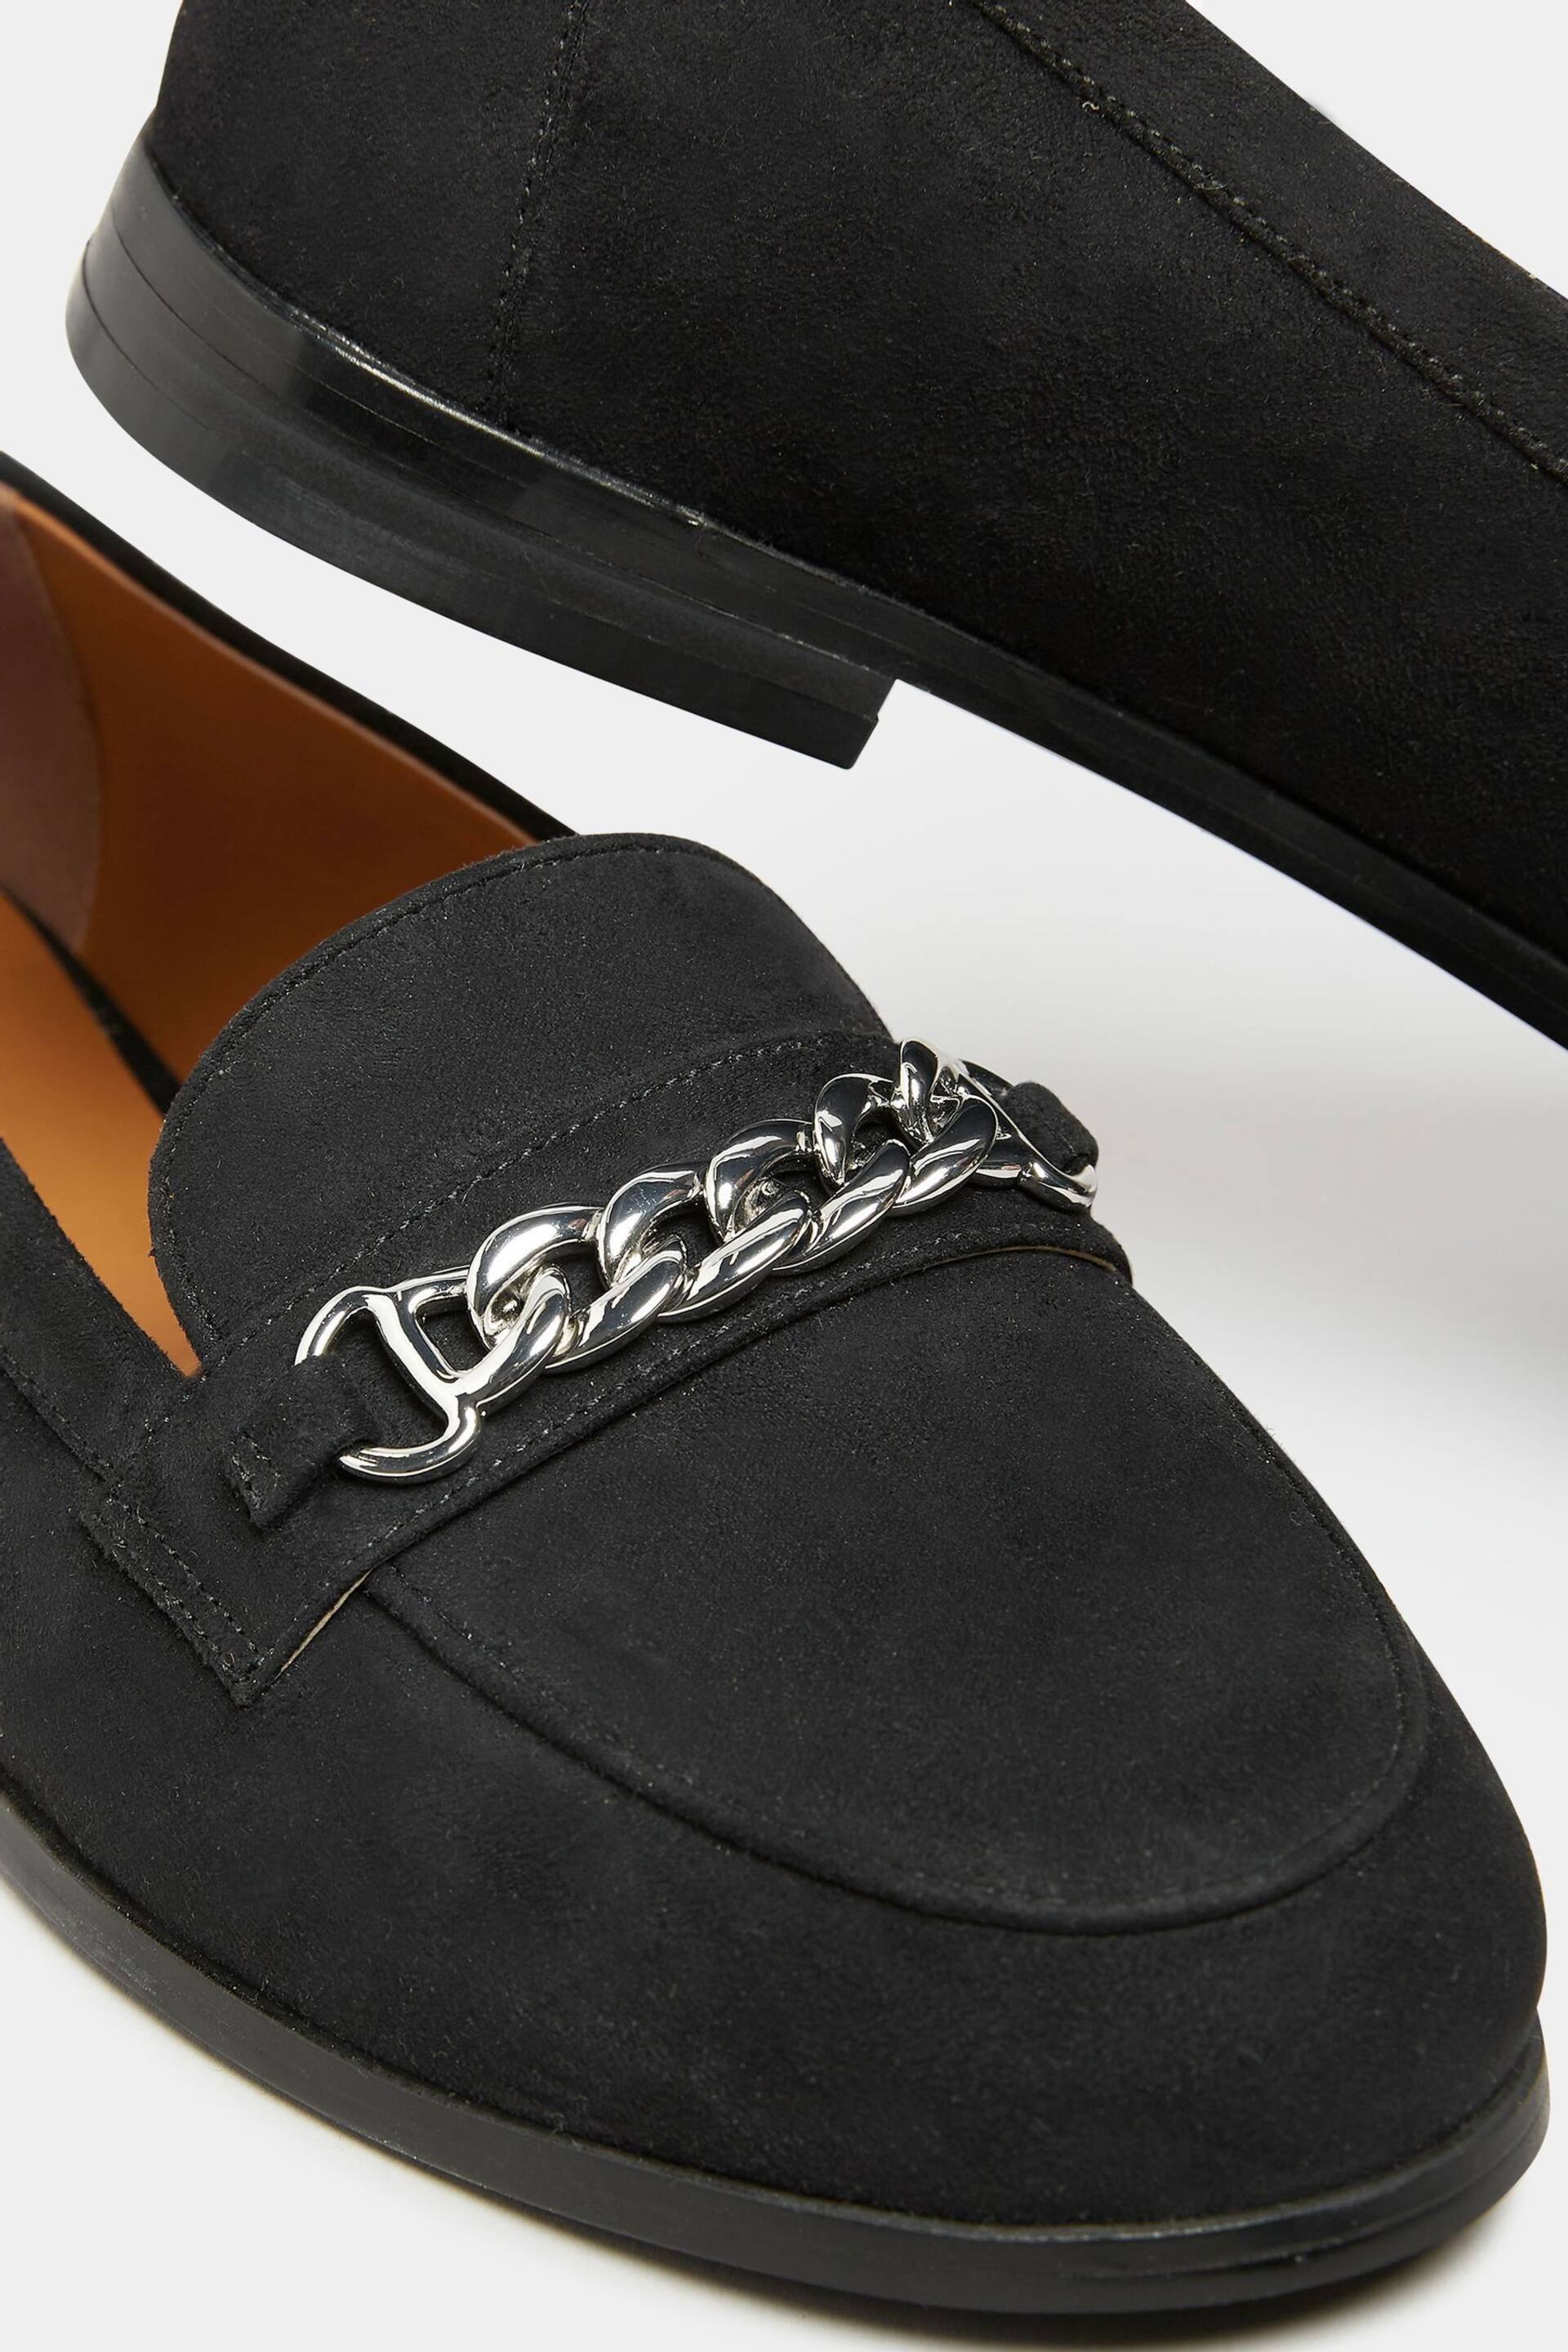 Long Tall Sally Black Chain Loafers - Image 5 of 5